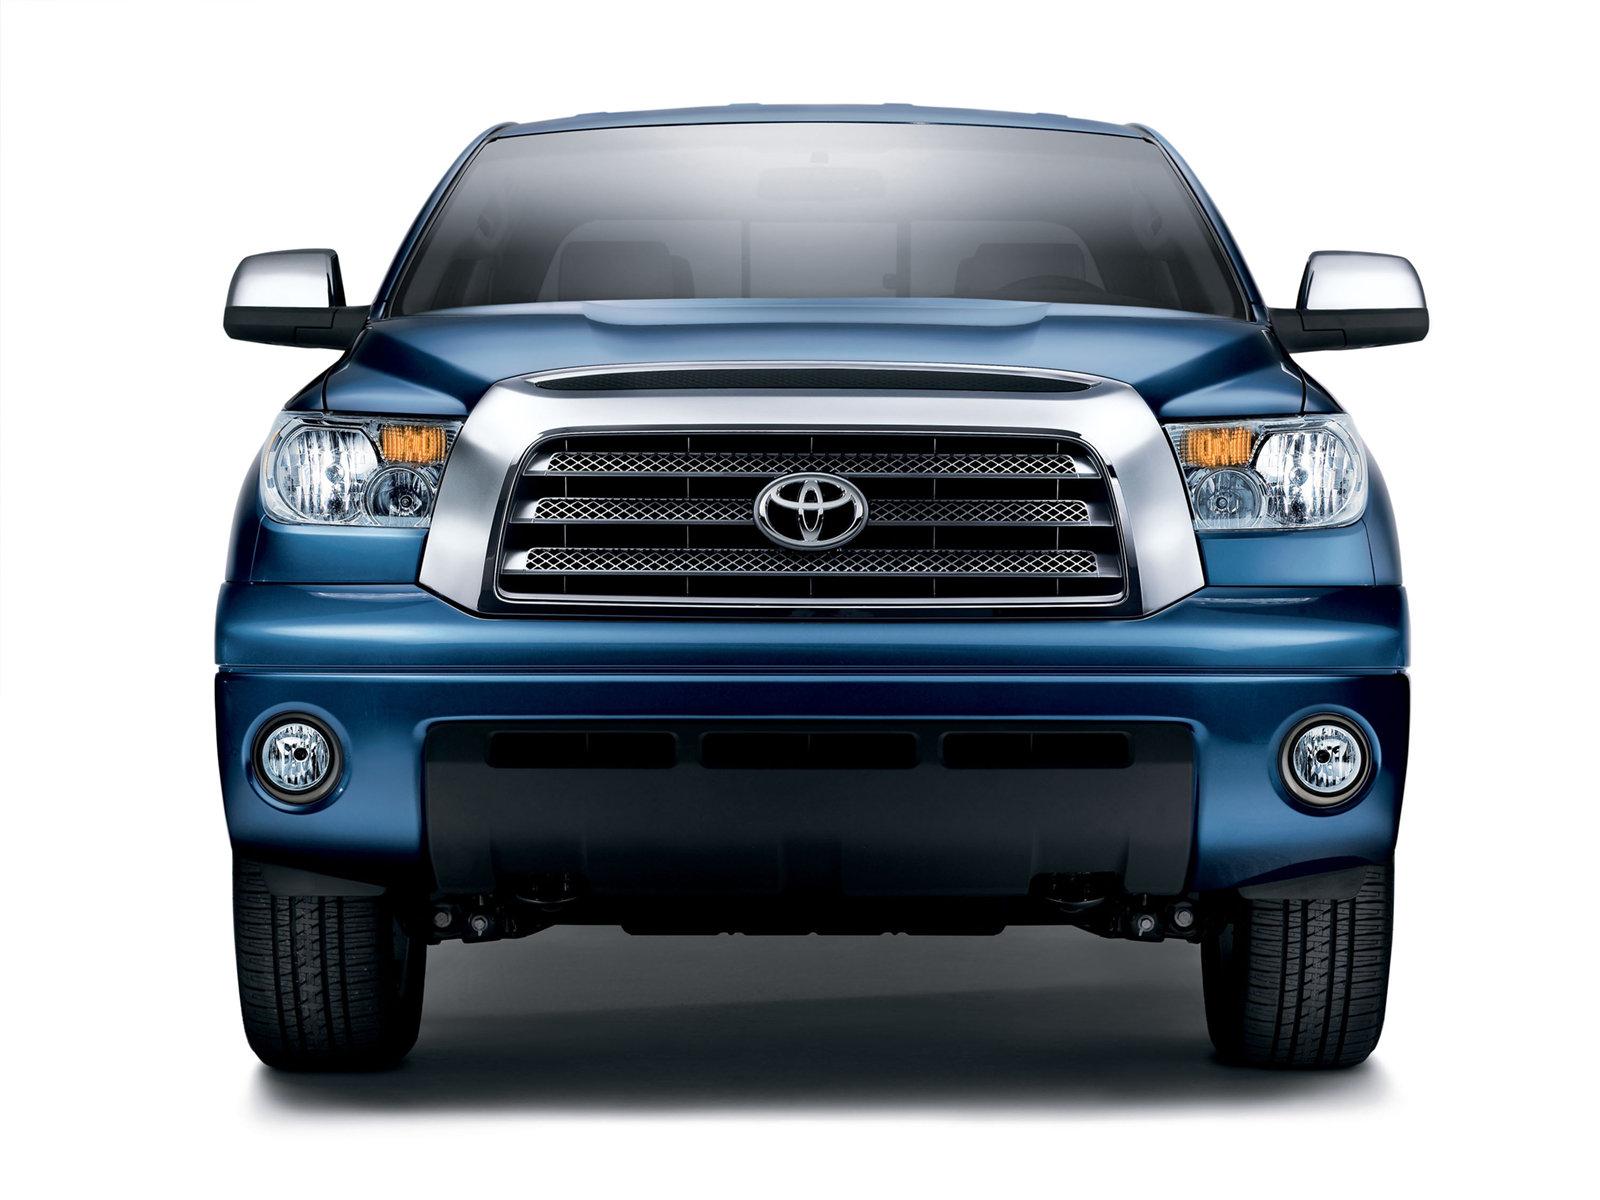 Over HD Stunning Toyota Wallpaper Image For